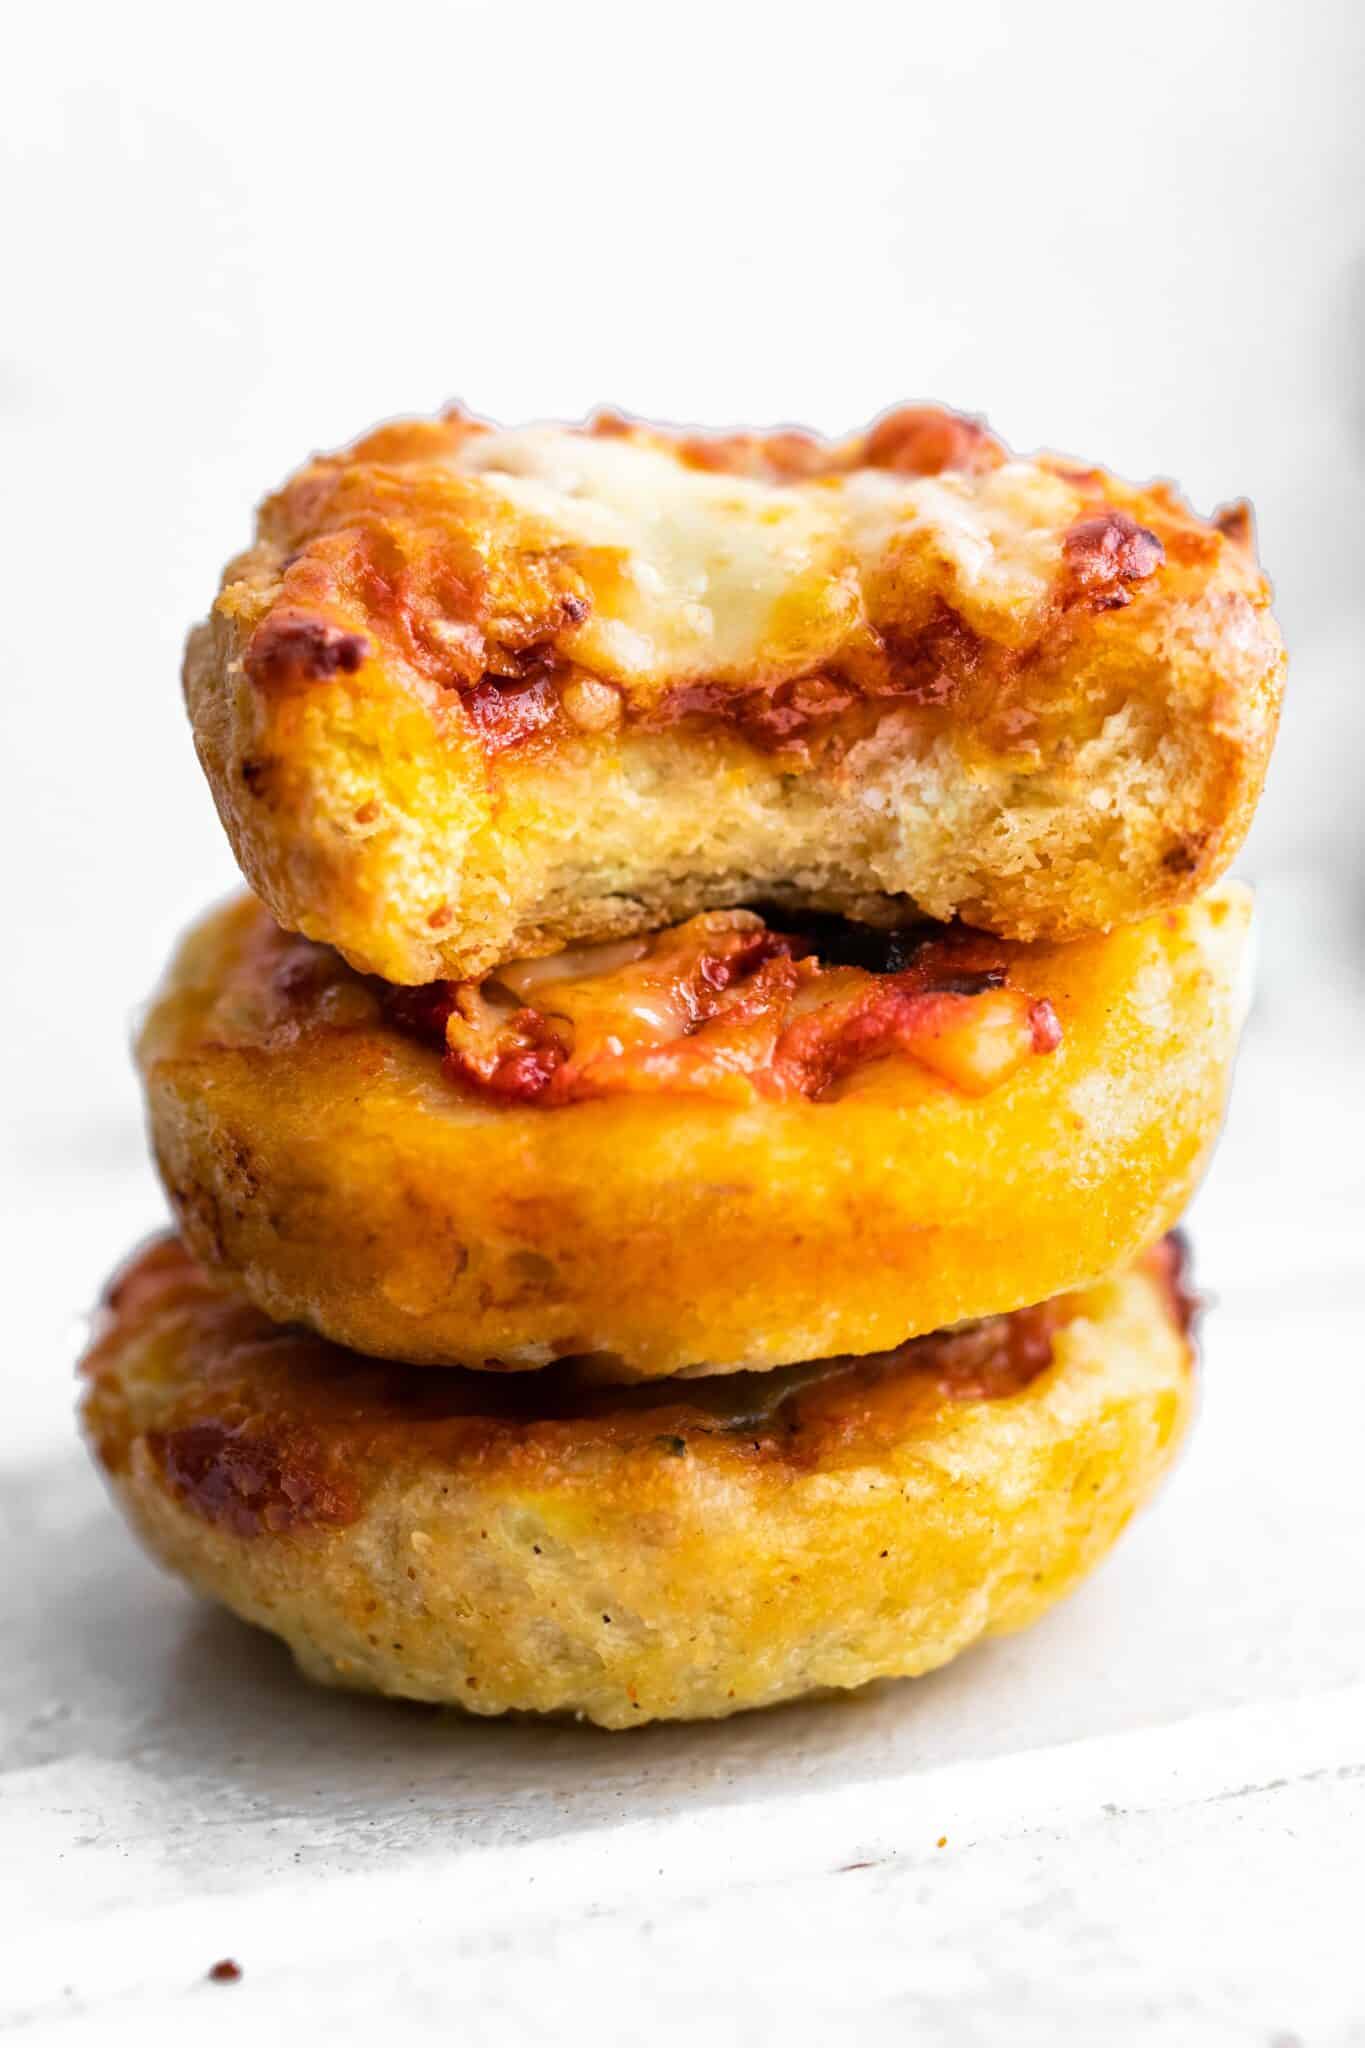 A stack of three pizza muffins with a bite taken out of the top muffin.